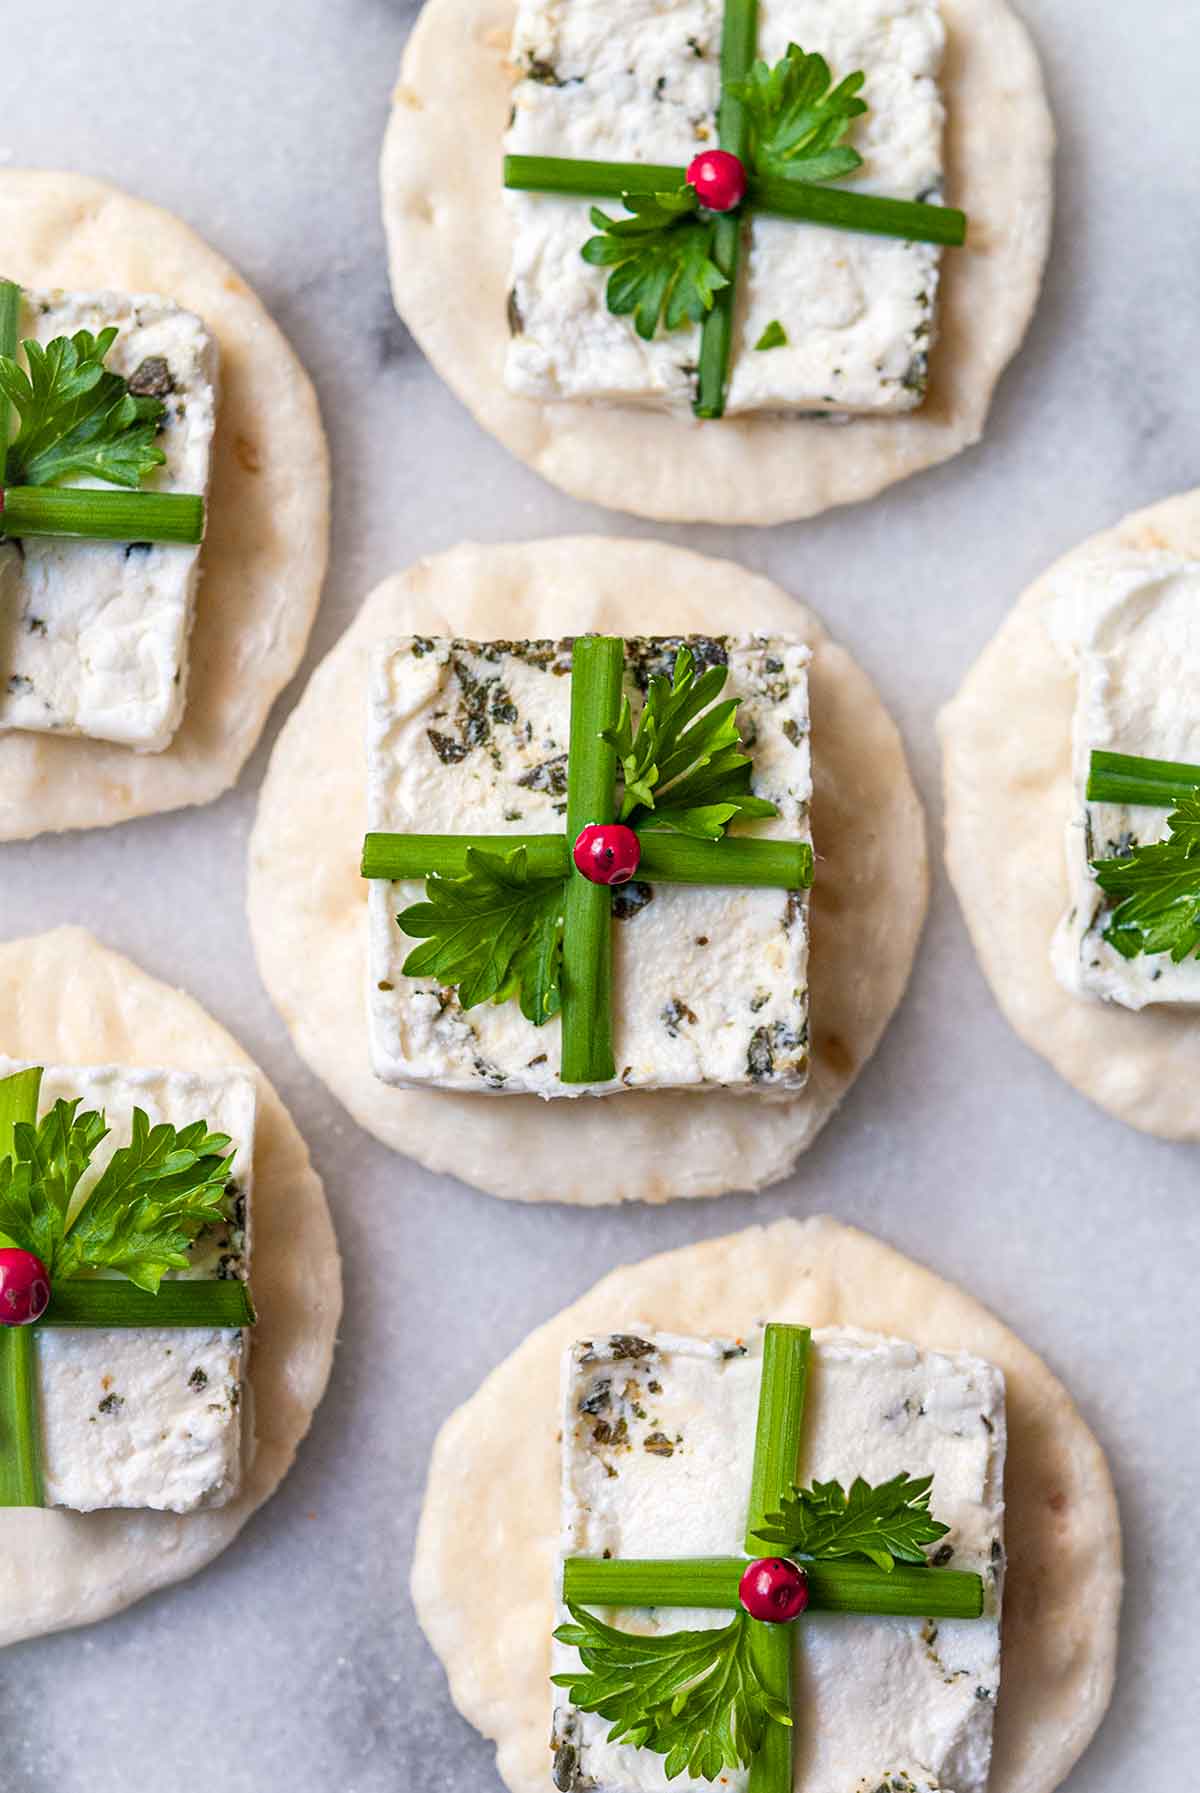 6 goat cheese appetizers on marble that look like presents.